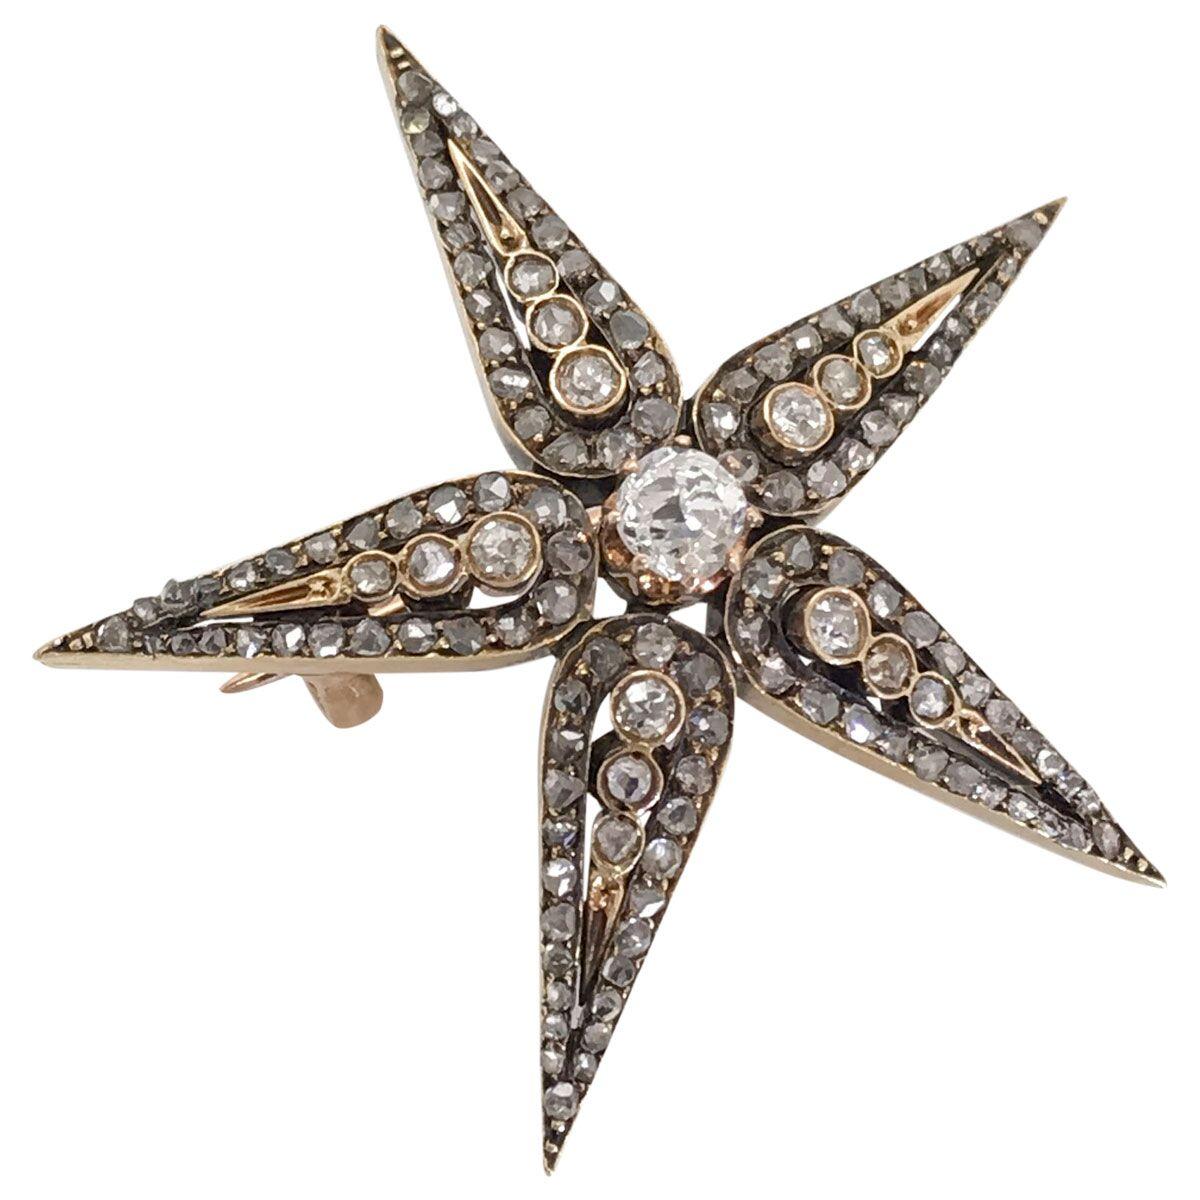 Some people might see a star in this brooch, some might see a starfish or even a snowflake but regardless of what you see it's beautiful. An original antique brooch with a combination of old cut and rose cut diamonds. It is fashioned from silver